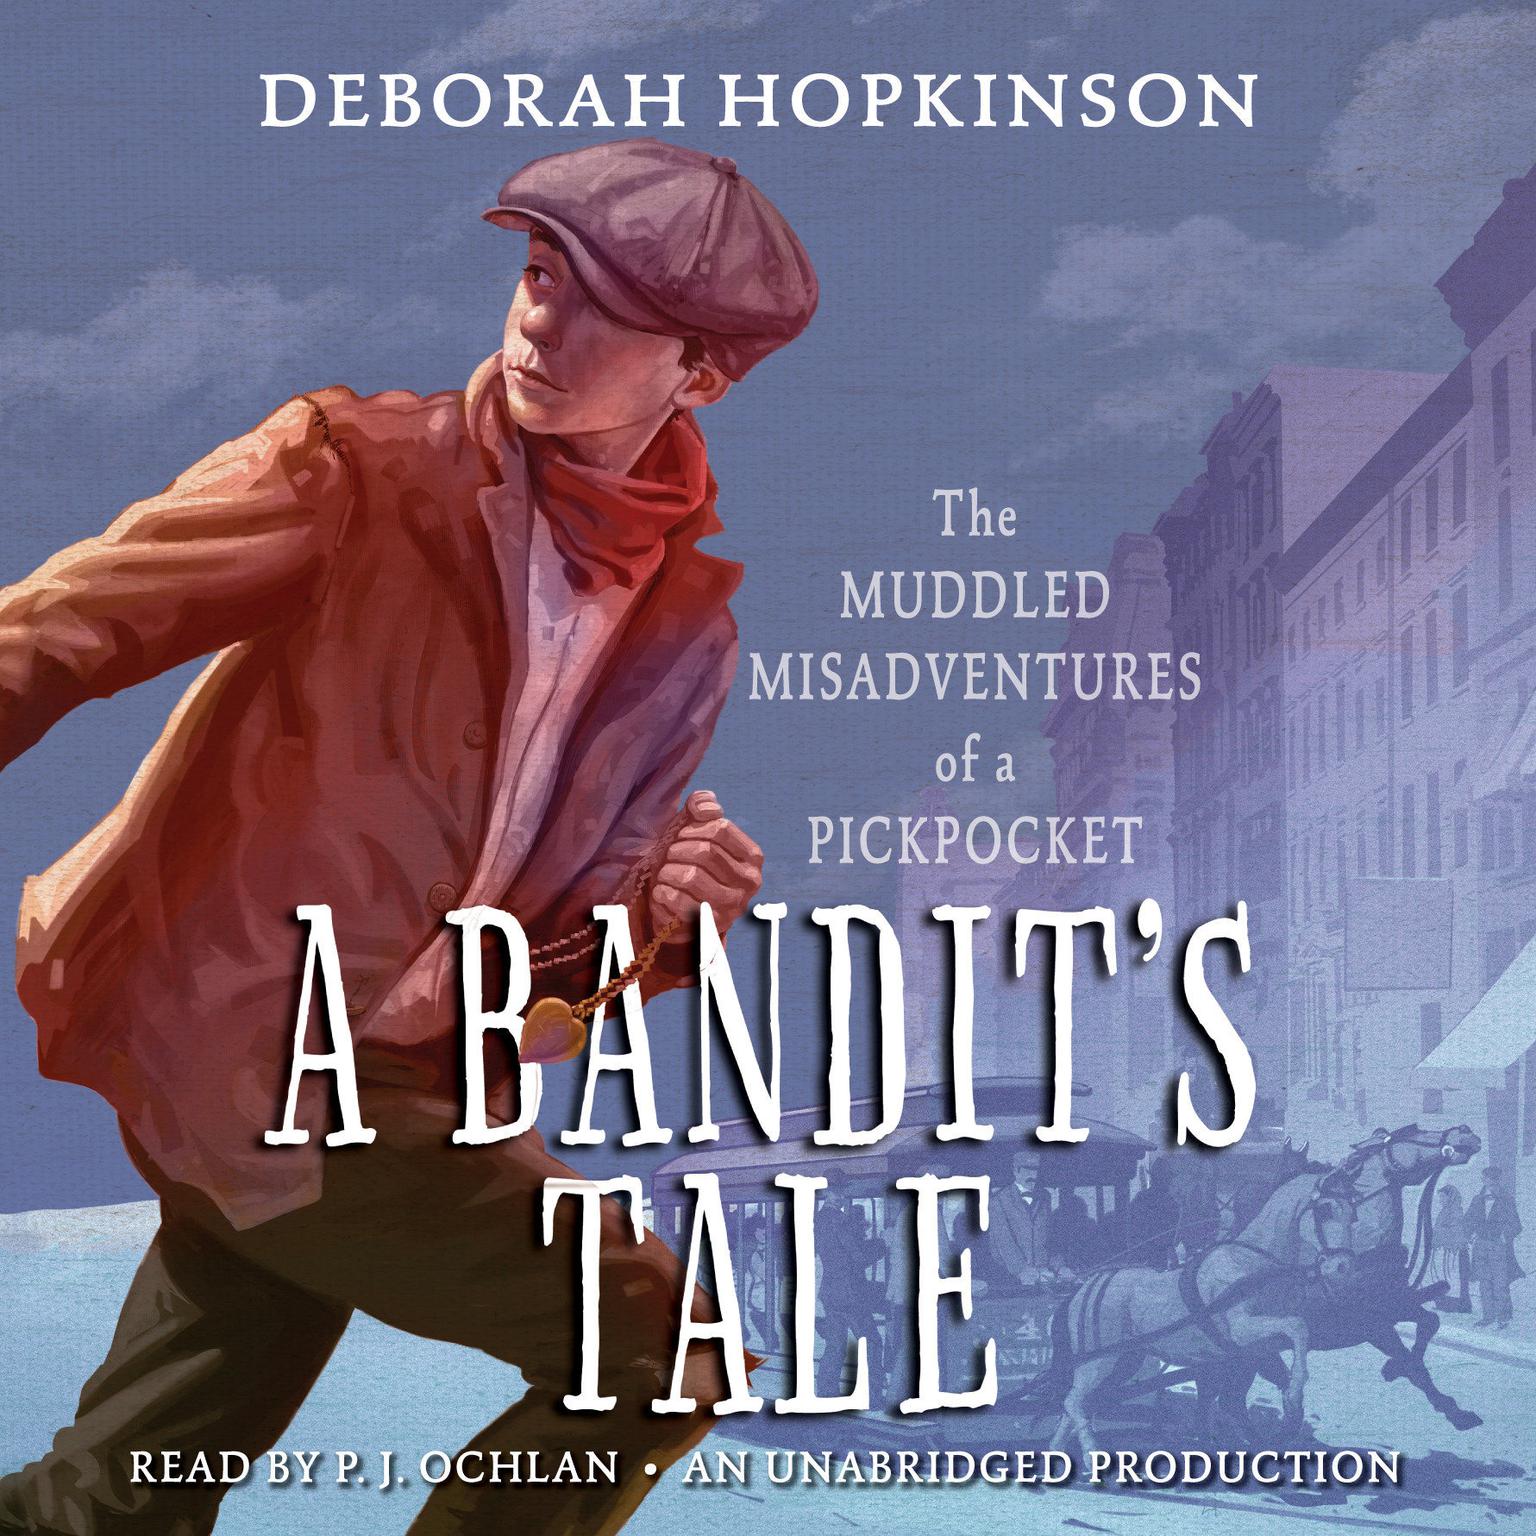 A Bandits Tale: The Muddled Misadventures of a Pickpocket:  The Muddled Misadventures of a Pickpocket Audiobook, by Deborah Hopkinson